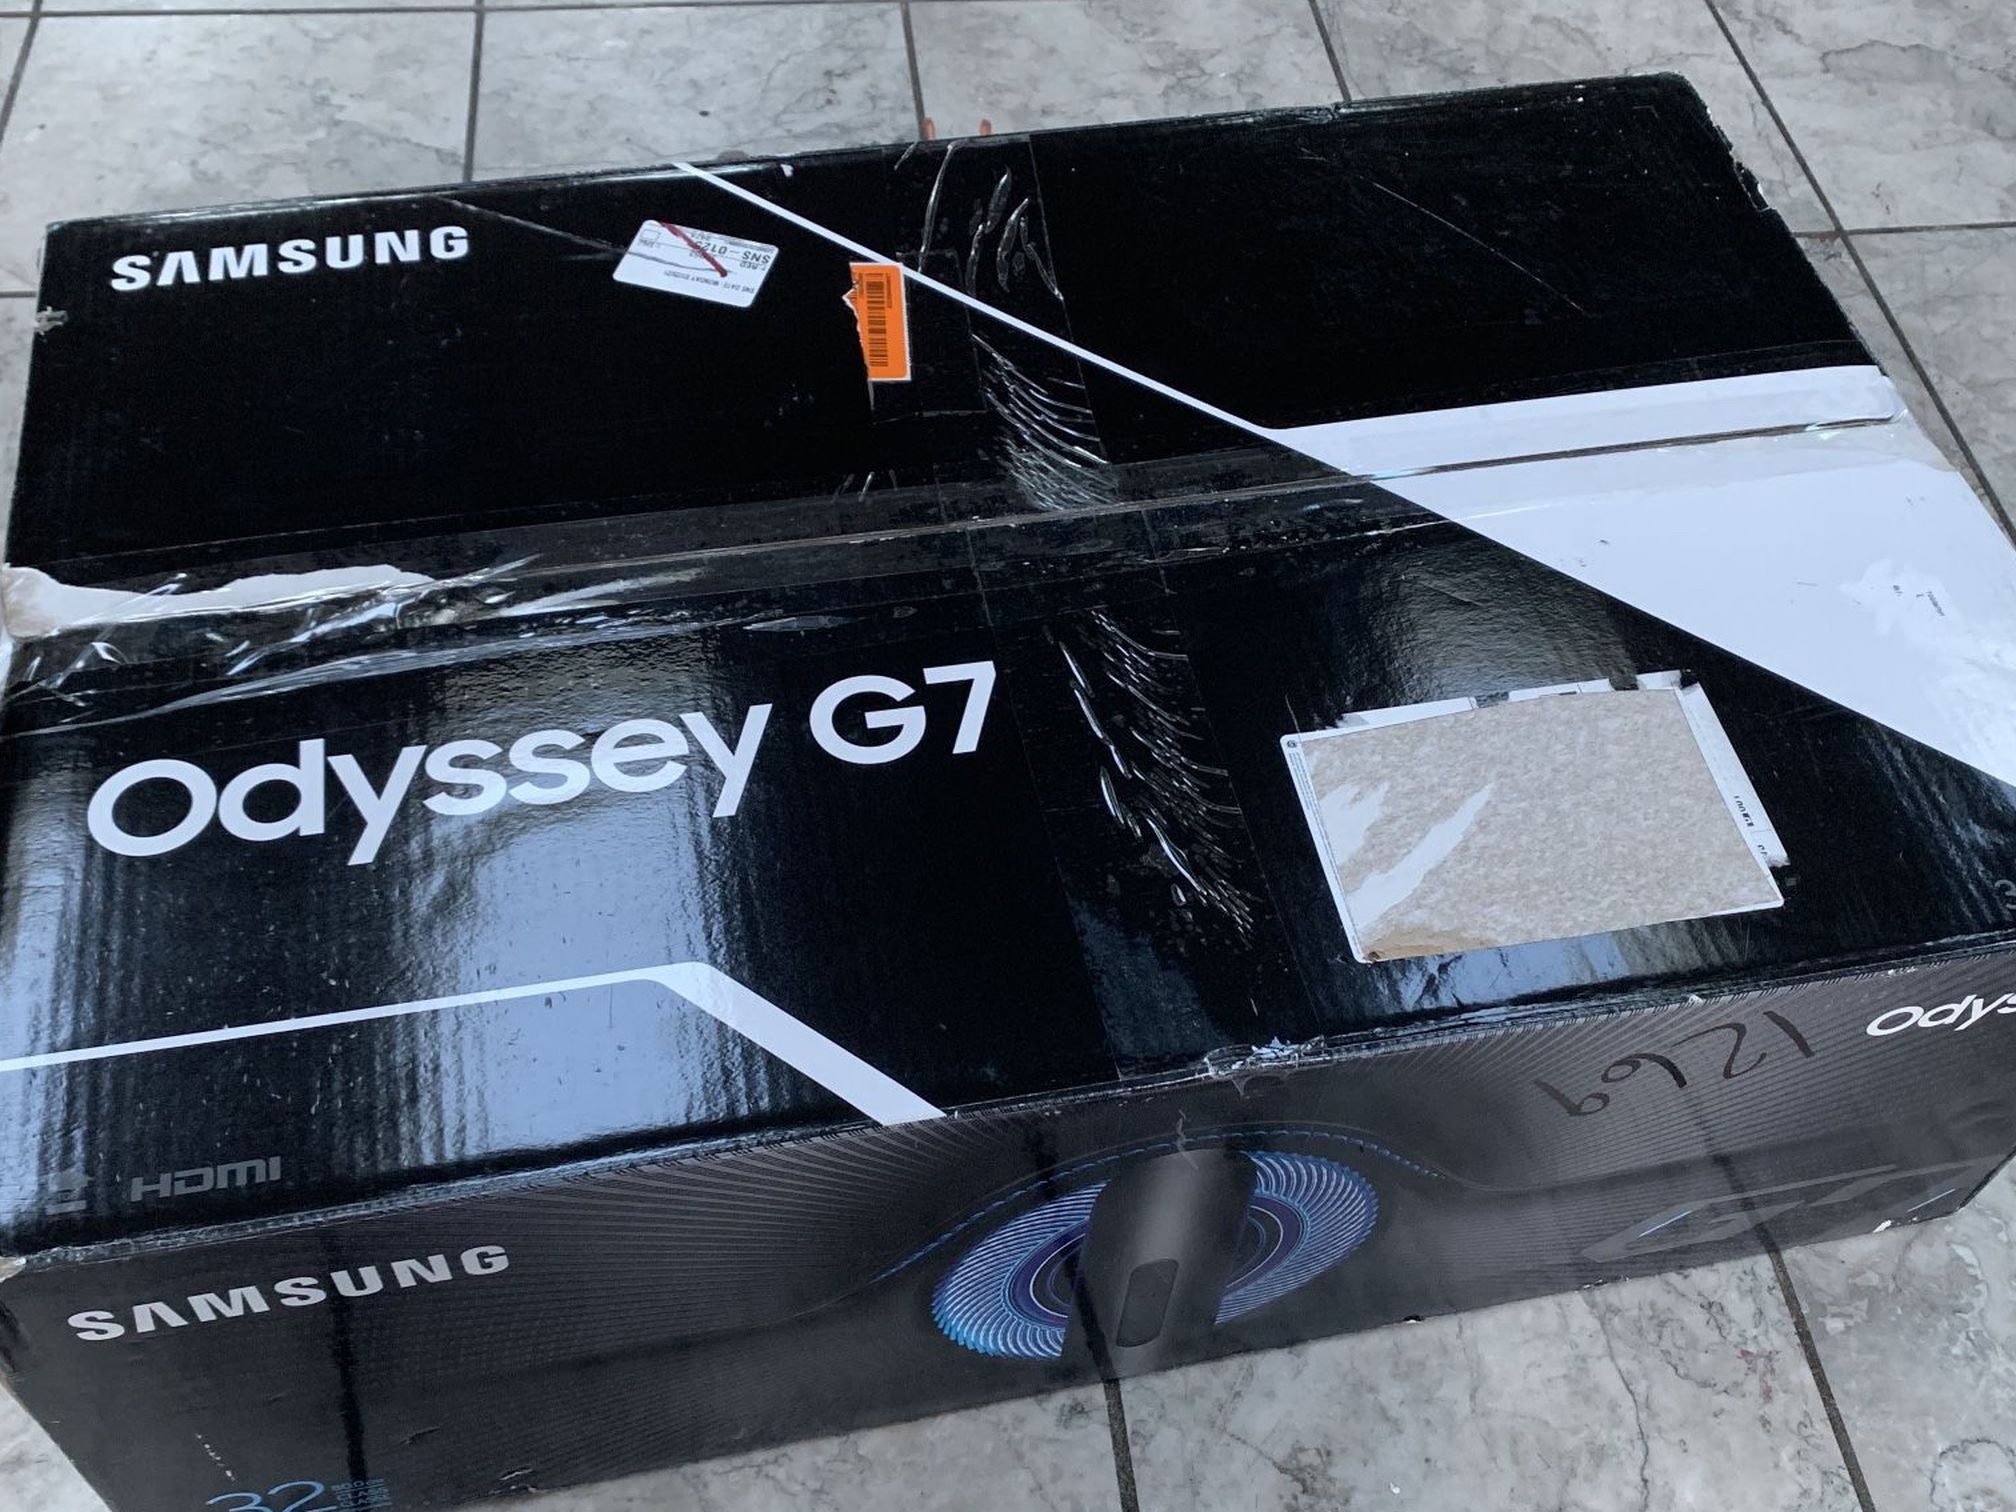 Samsung Odyssey G7 32” 1440p 240hz Curved Gaming Monitor With HDR600